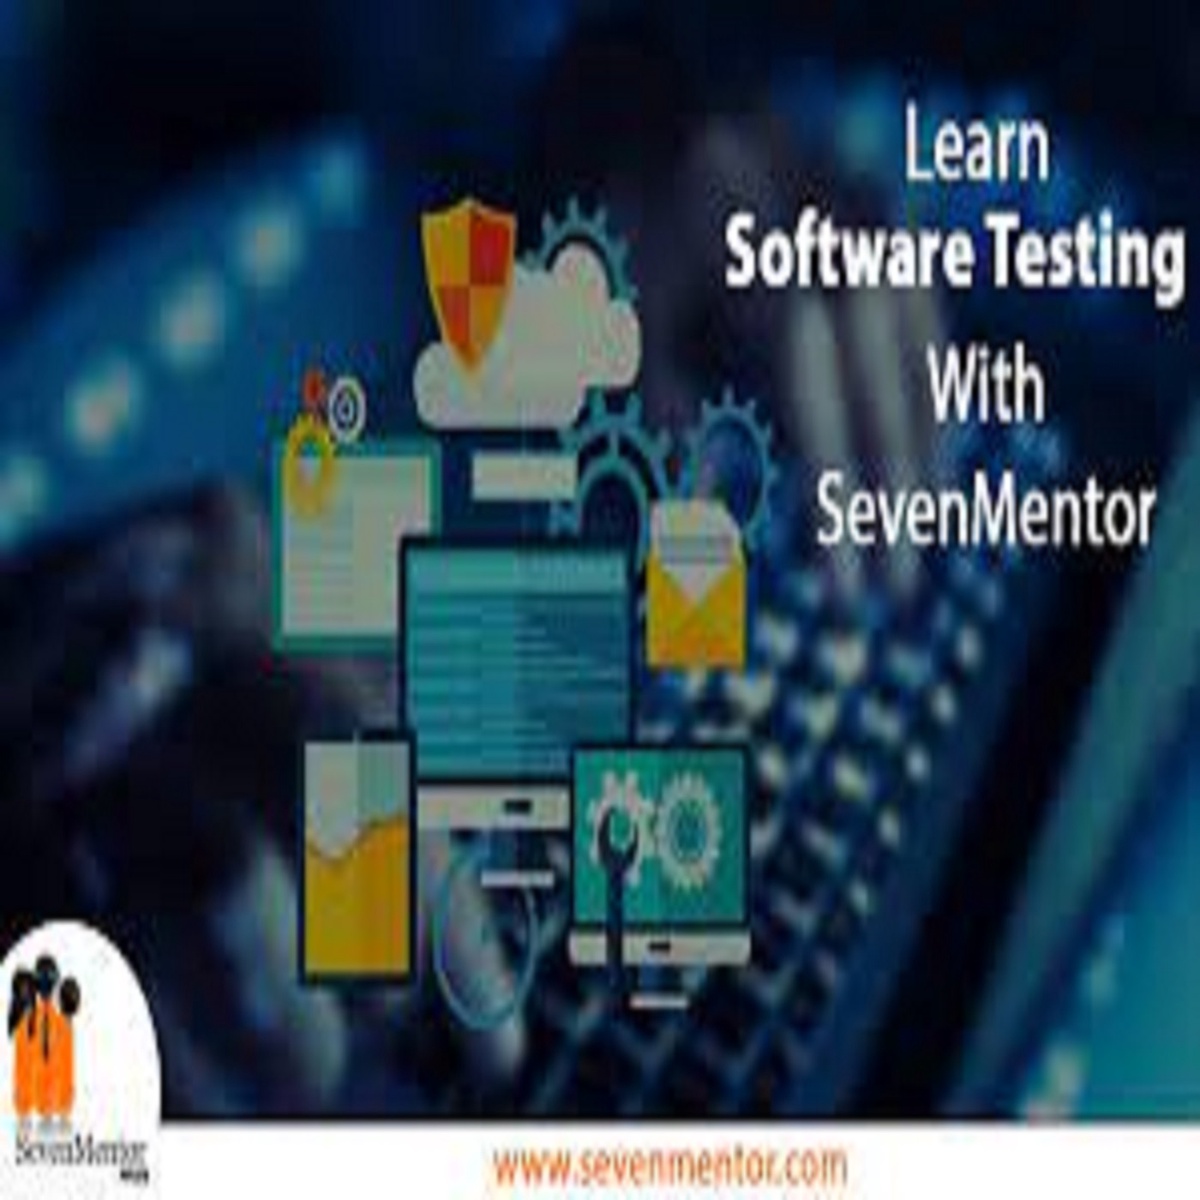 Why is mobile application testing important in software development?